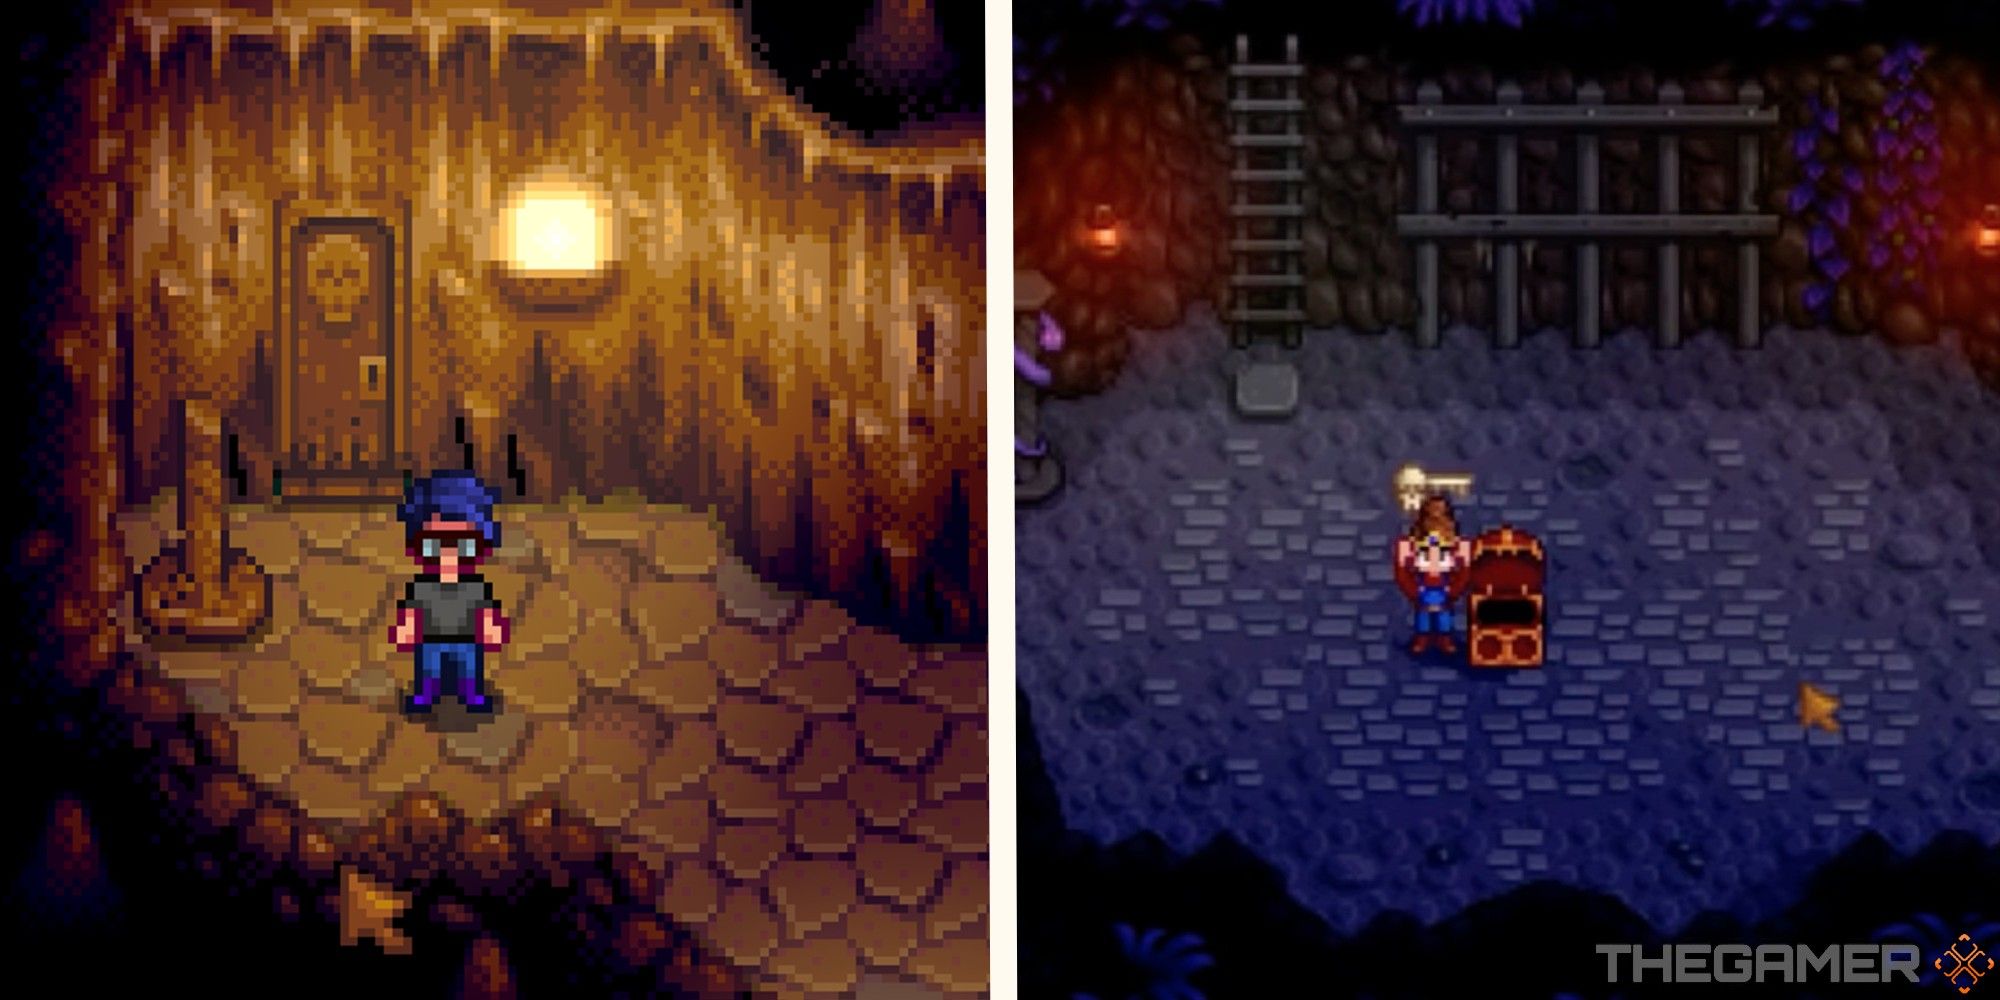 image of player standing at entrance of skull cavern, next to image of player holding skull key